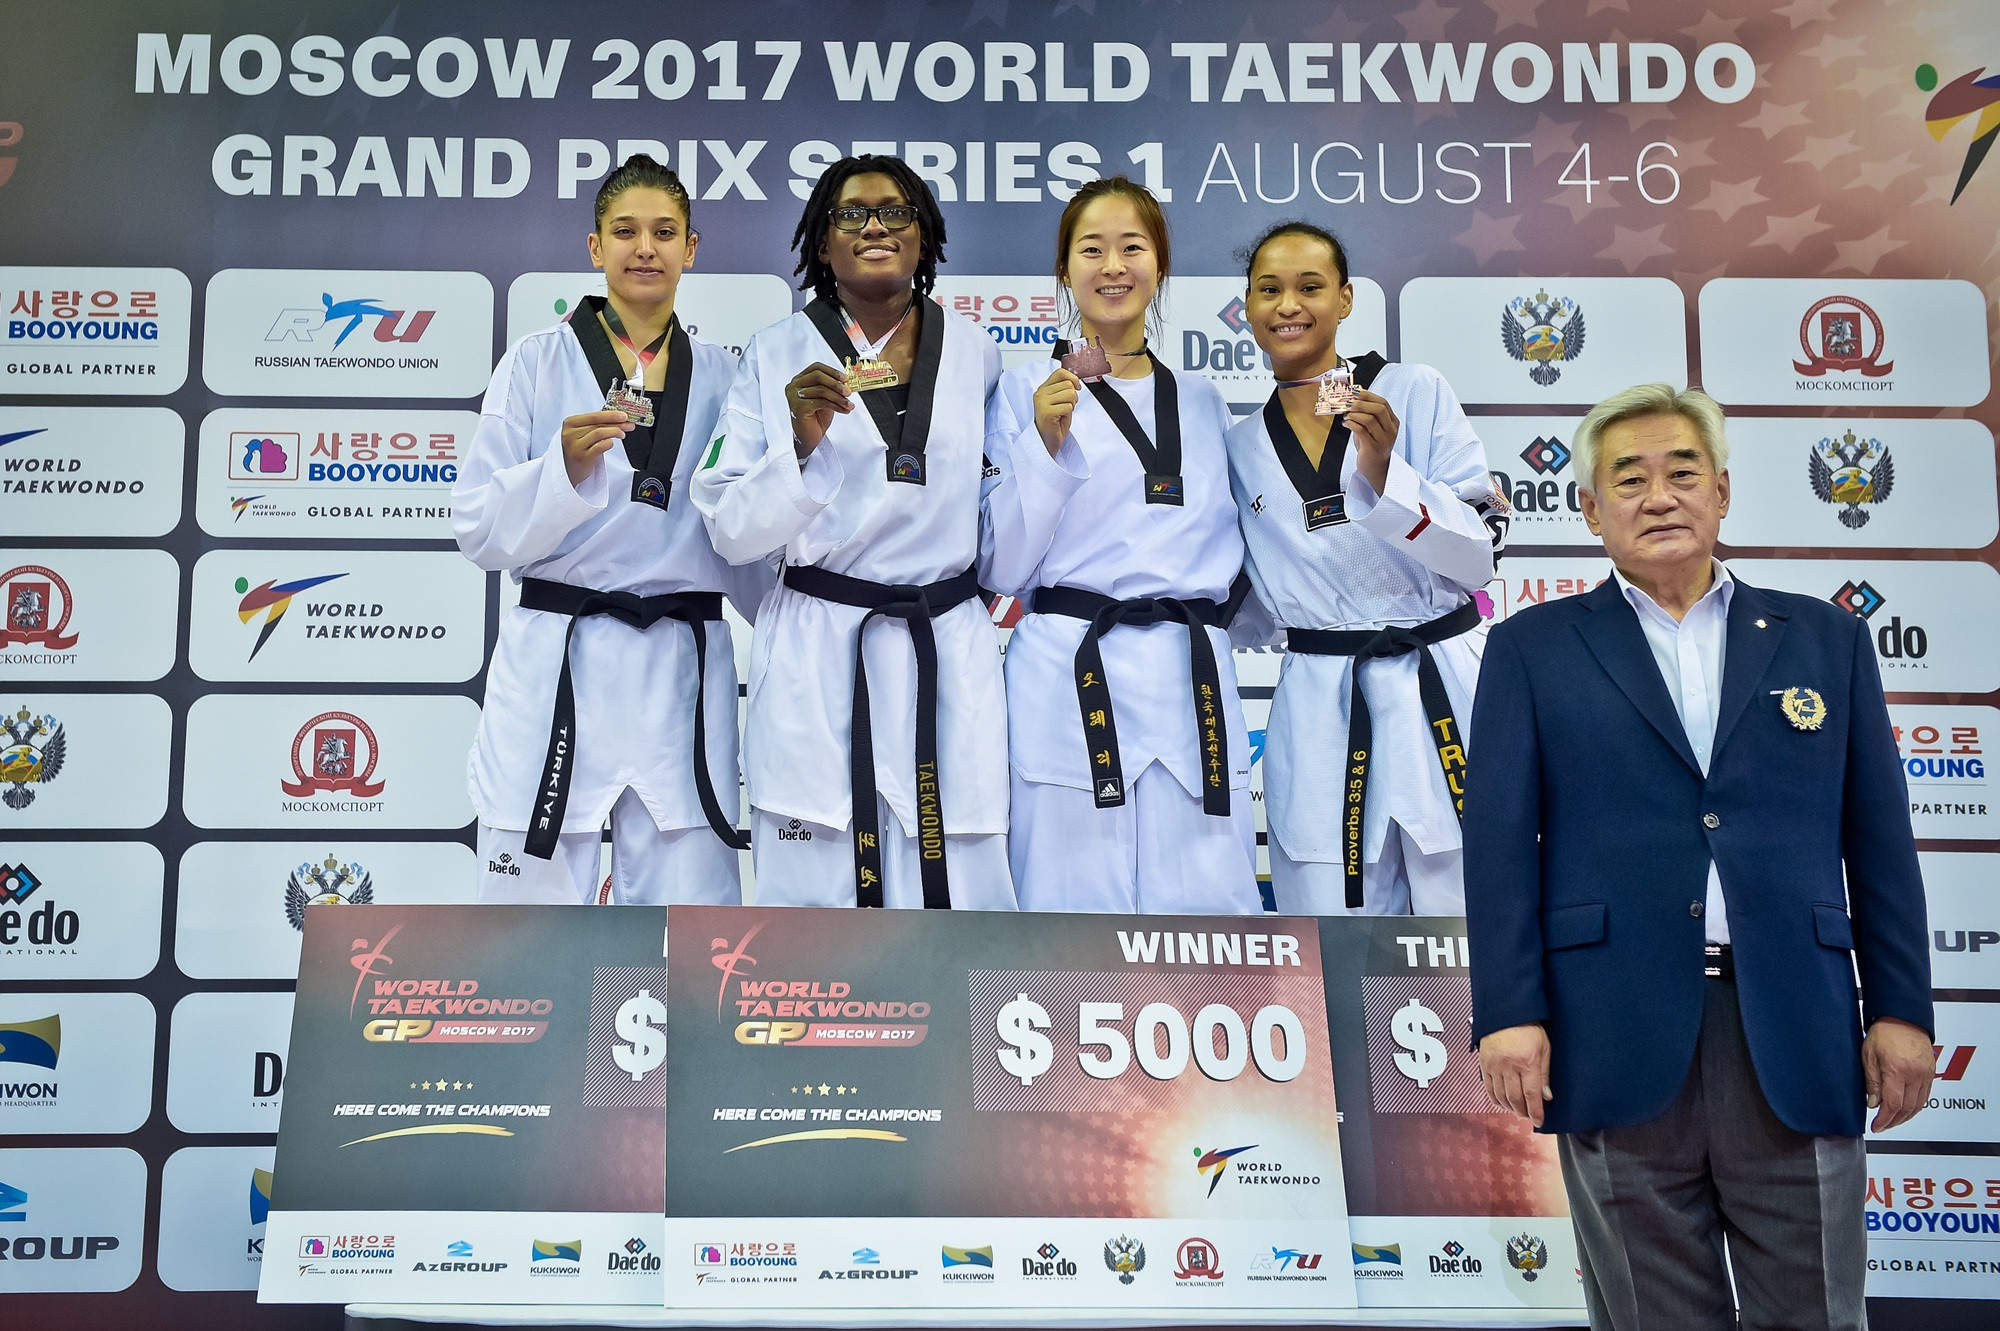 Ruth Gbagbi of the Ivory Coast stepped up a weight class to beat reigning world champion Nur Tatar of Turkey in the final of the women's under 67 kilograms event ©World Taekwondo 